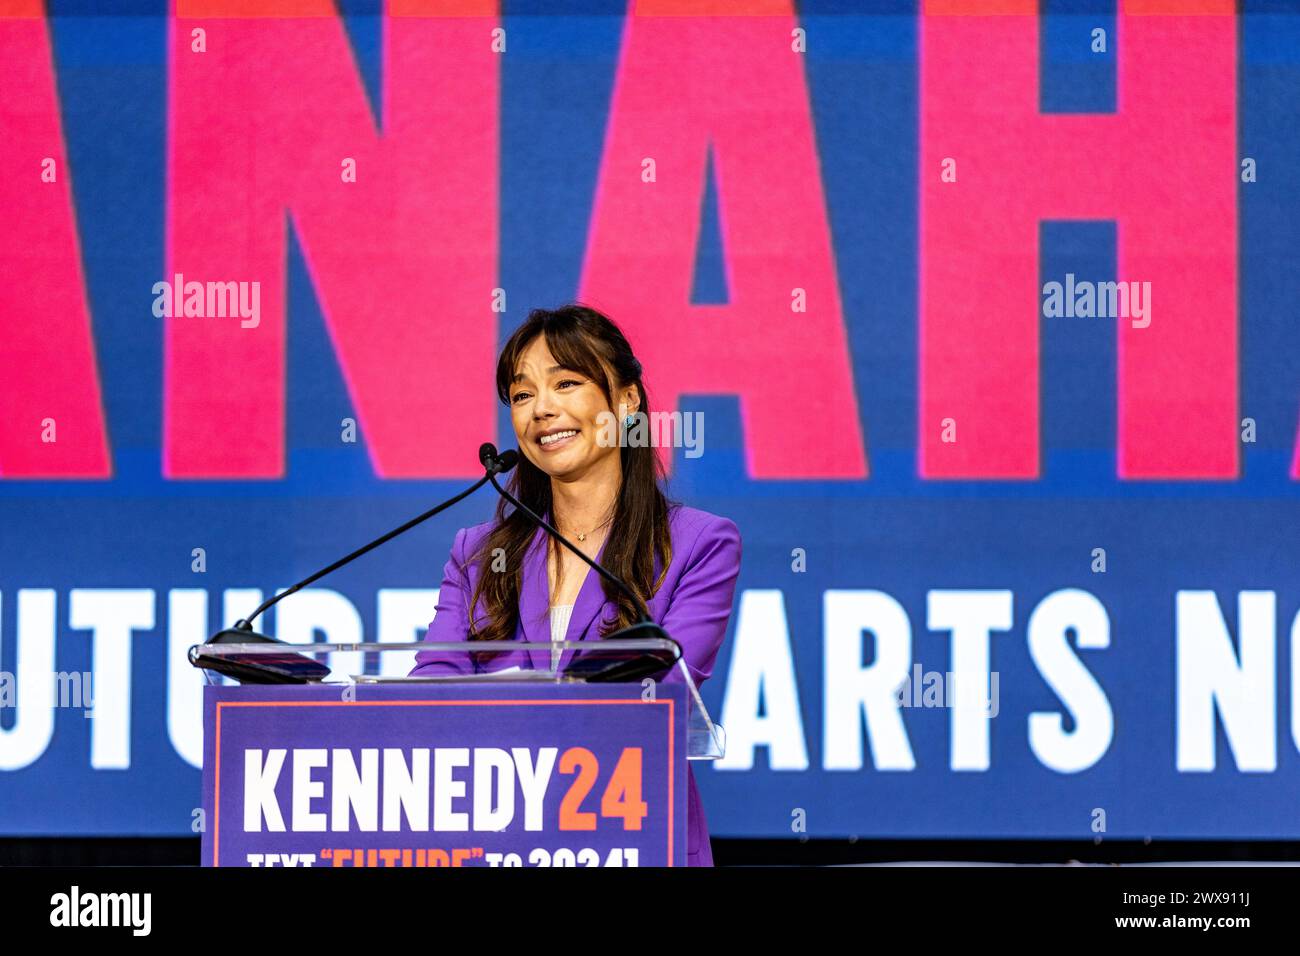 Nicole Shanahan speaks after she is introduced as the running mate to Independent presidential candidate Robert F. Kennedy at a campaign event in Oakl Stock Photo